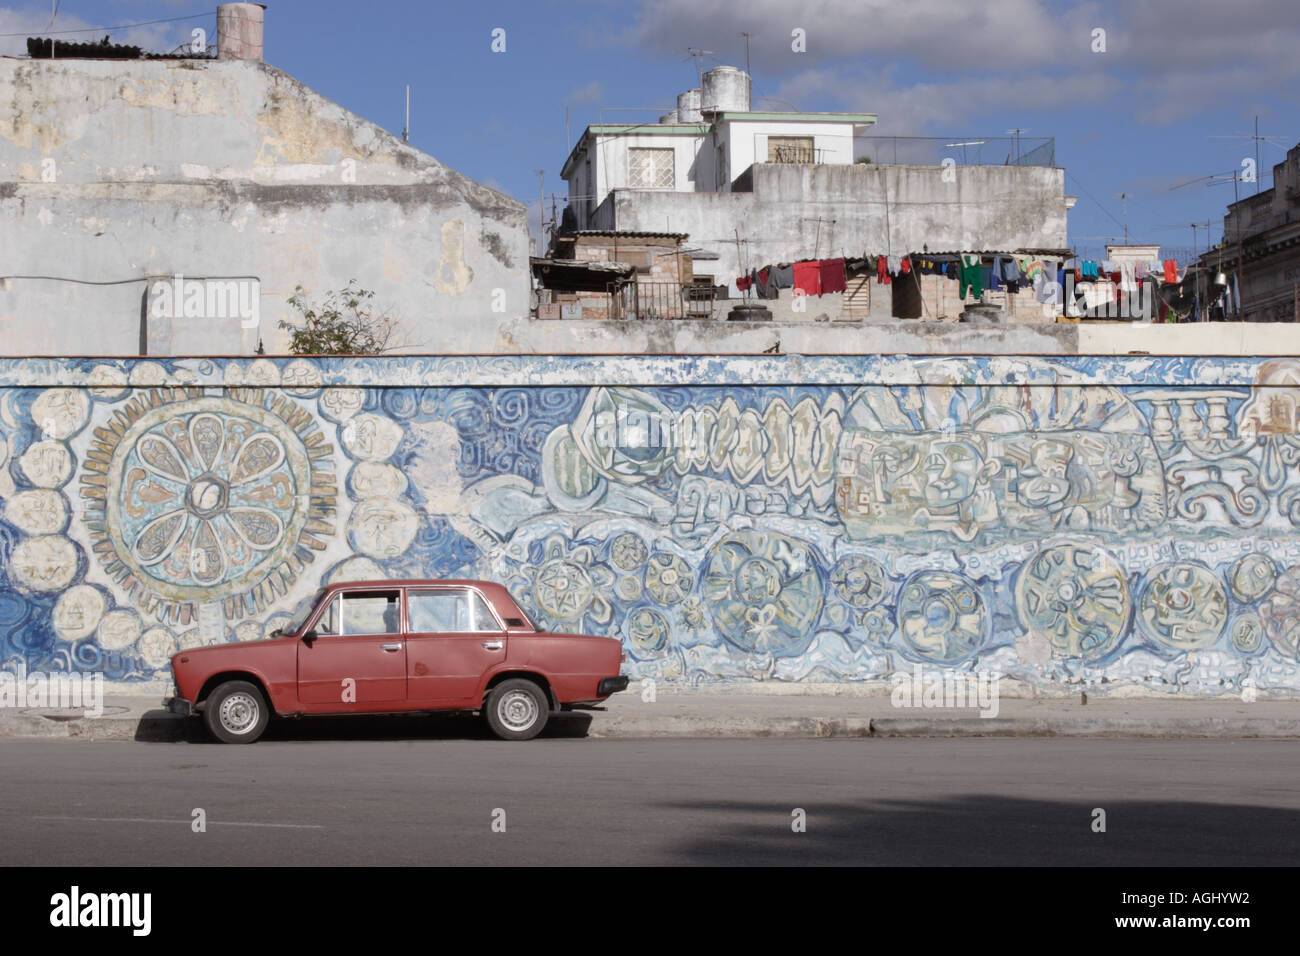 Red Lada parked by a mural in Havana, Cuba Stock Photo